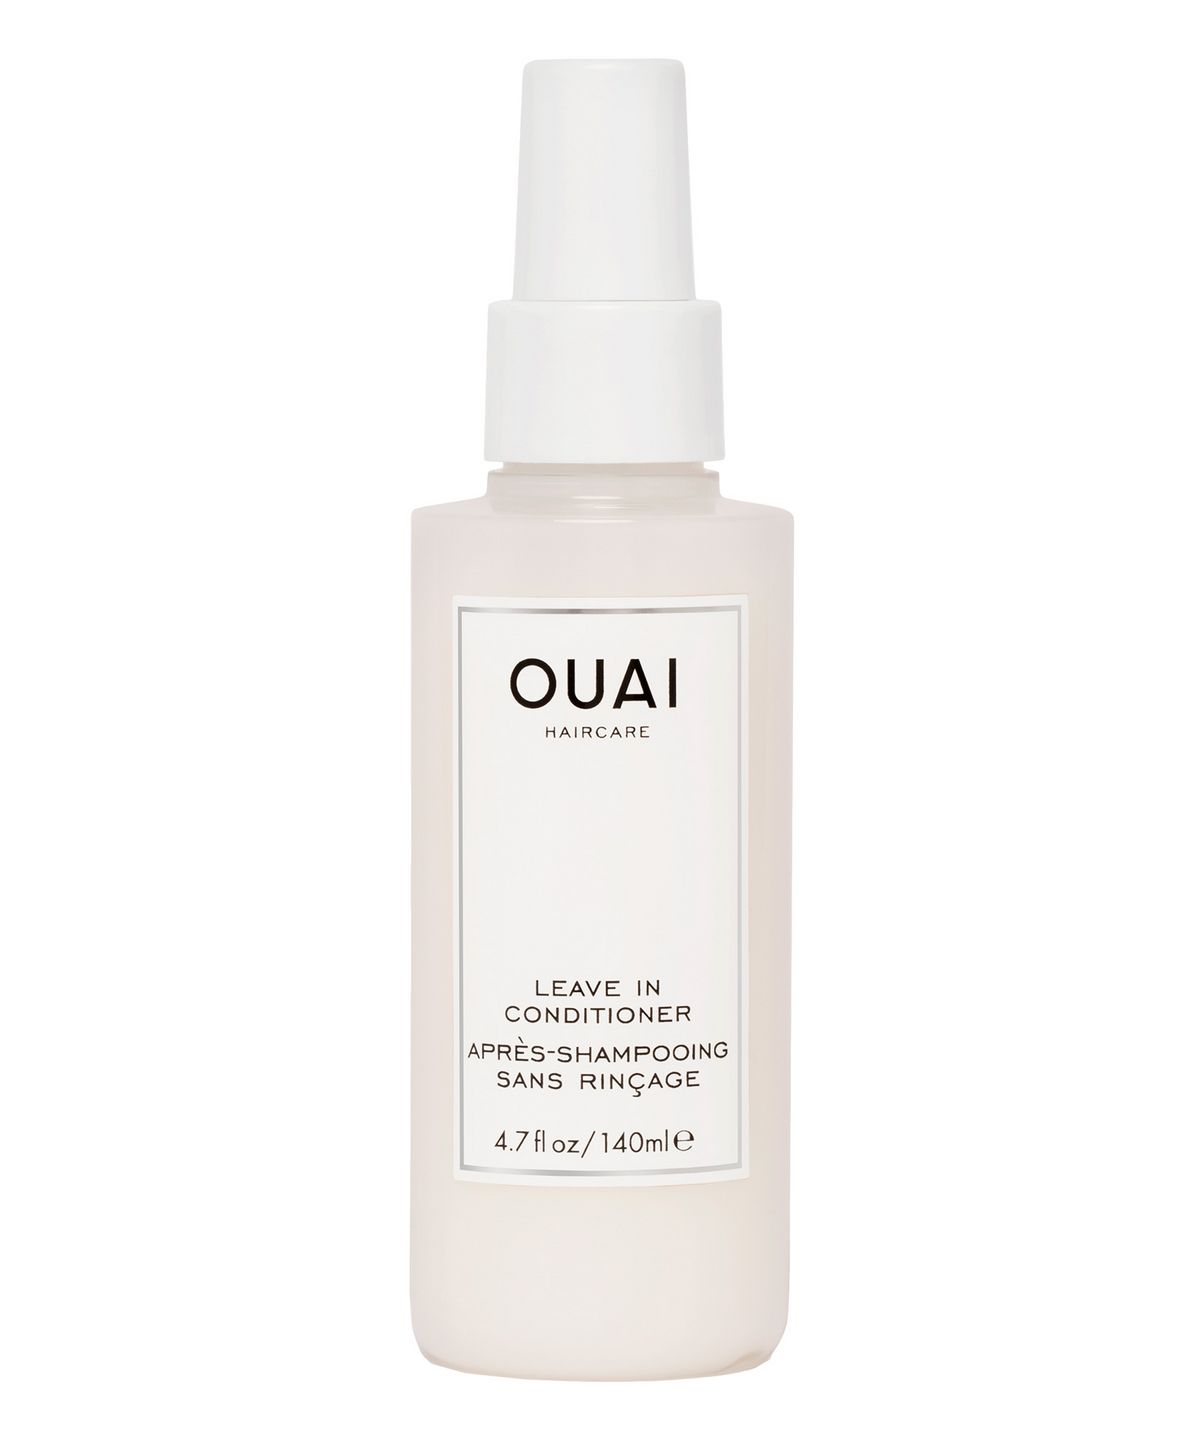 Leave In Conditioner by OUAI Haircare in UAE at Shopey